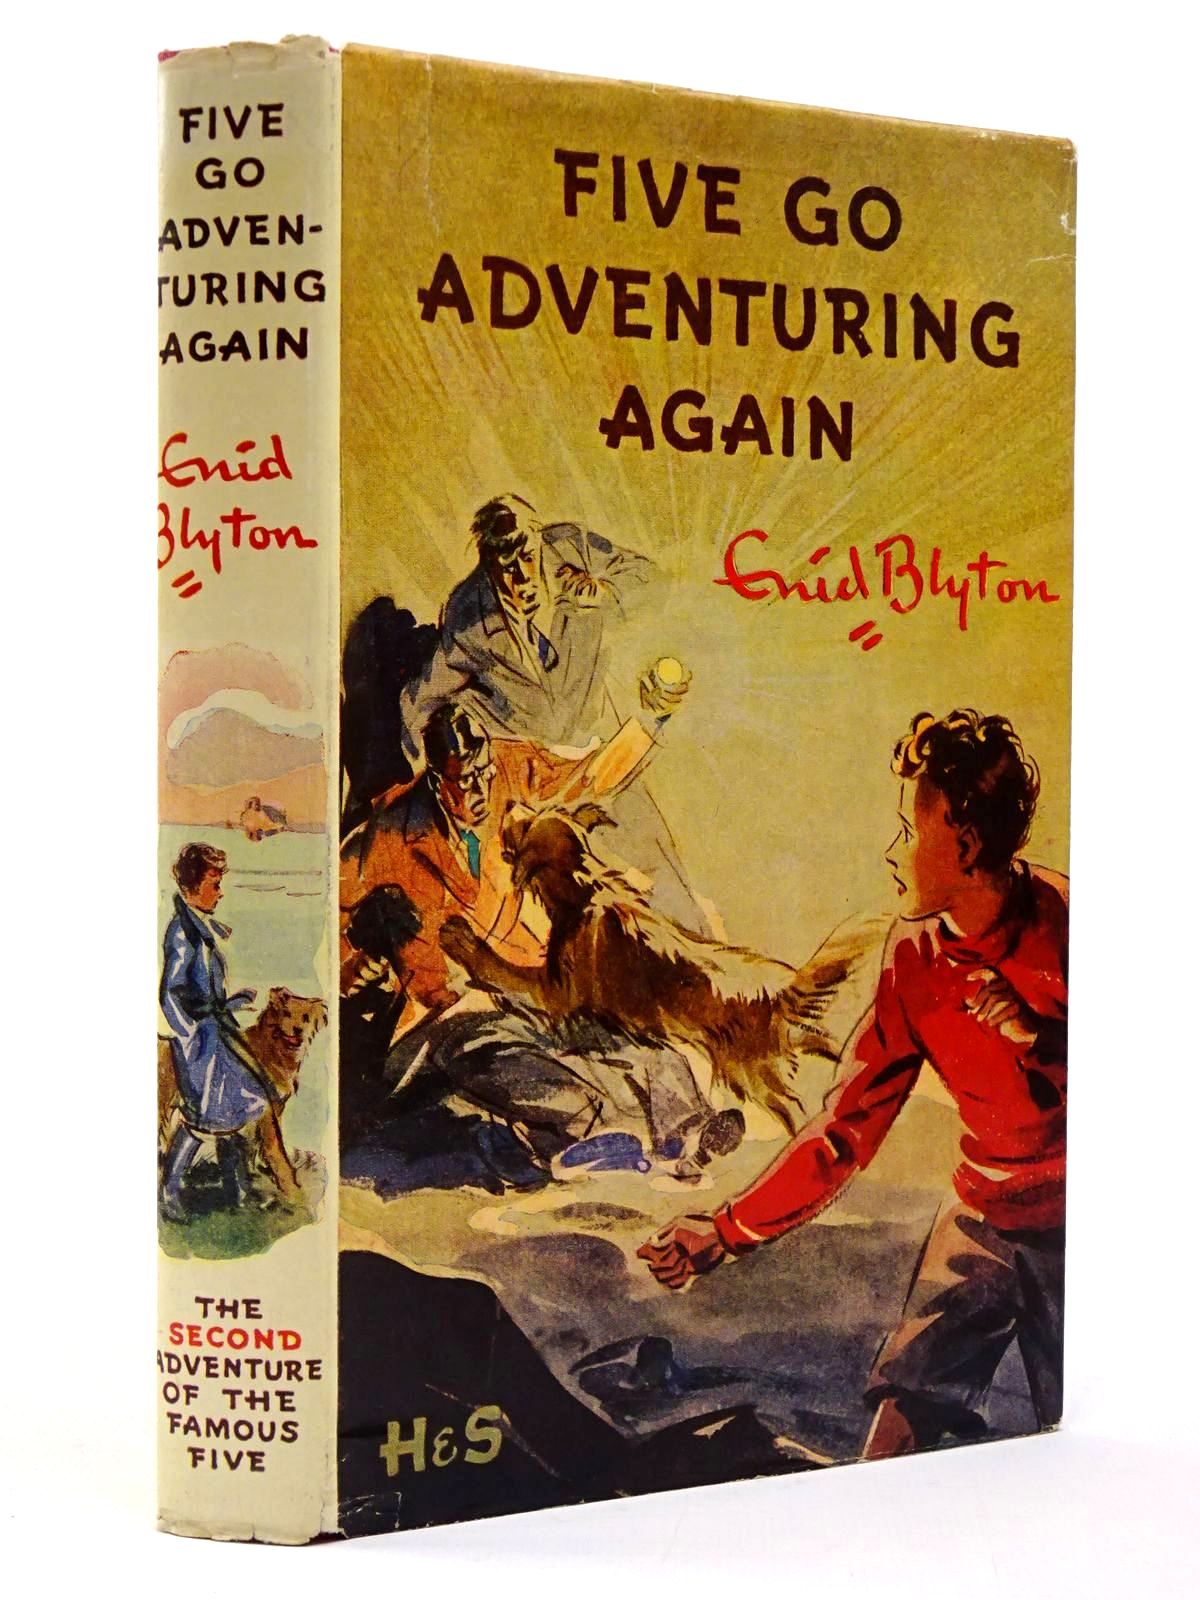 Cover of FIVE GO ADVENTURING AGAIN by Enid Blyton